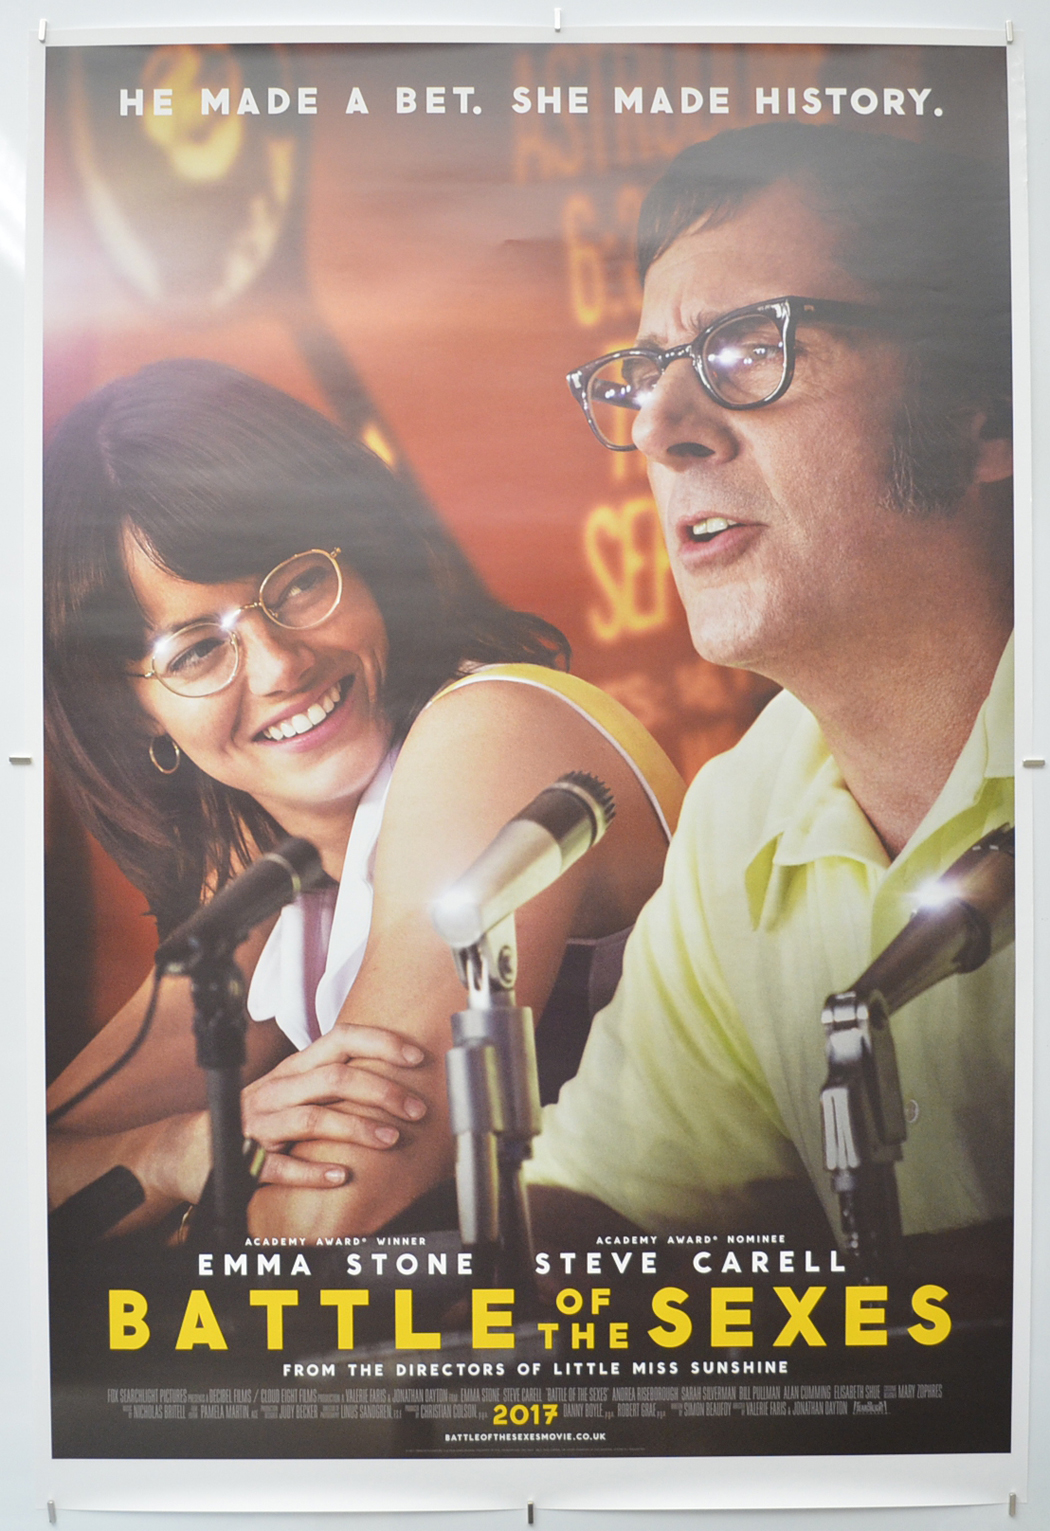 Battle of the Sexes (2017) directed by Jonathan Dayton, Valerie